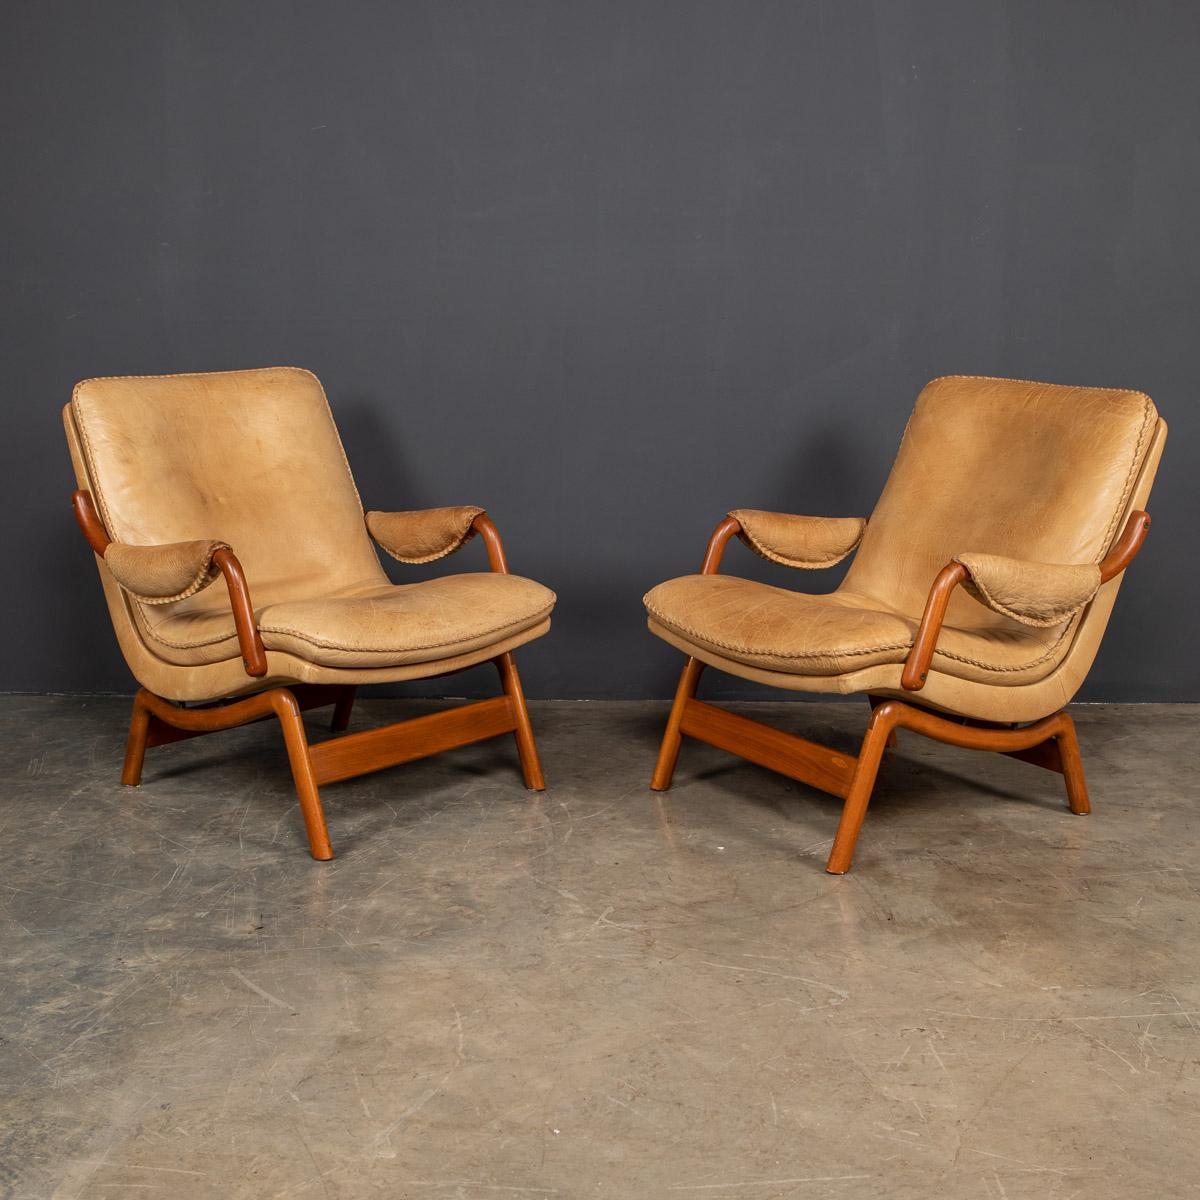 Pair of very stylish chairs, made by Ikea from the 1960's. This pair of comfortable chairs have a teak frame and cream leather seating with a good patination and a hand-stitch detail to the cushion.

Condition

In good condition - wear as